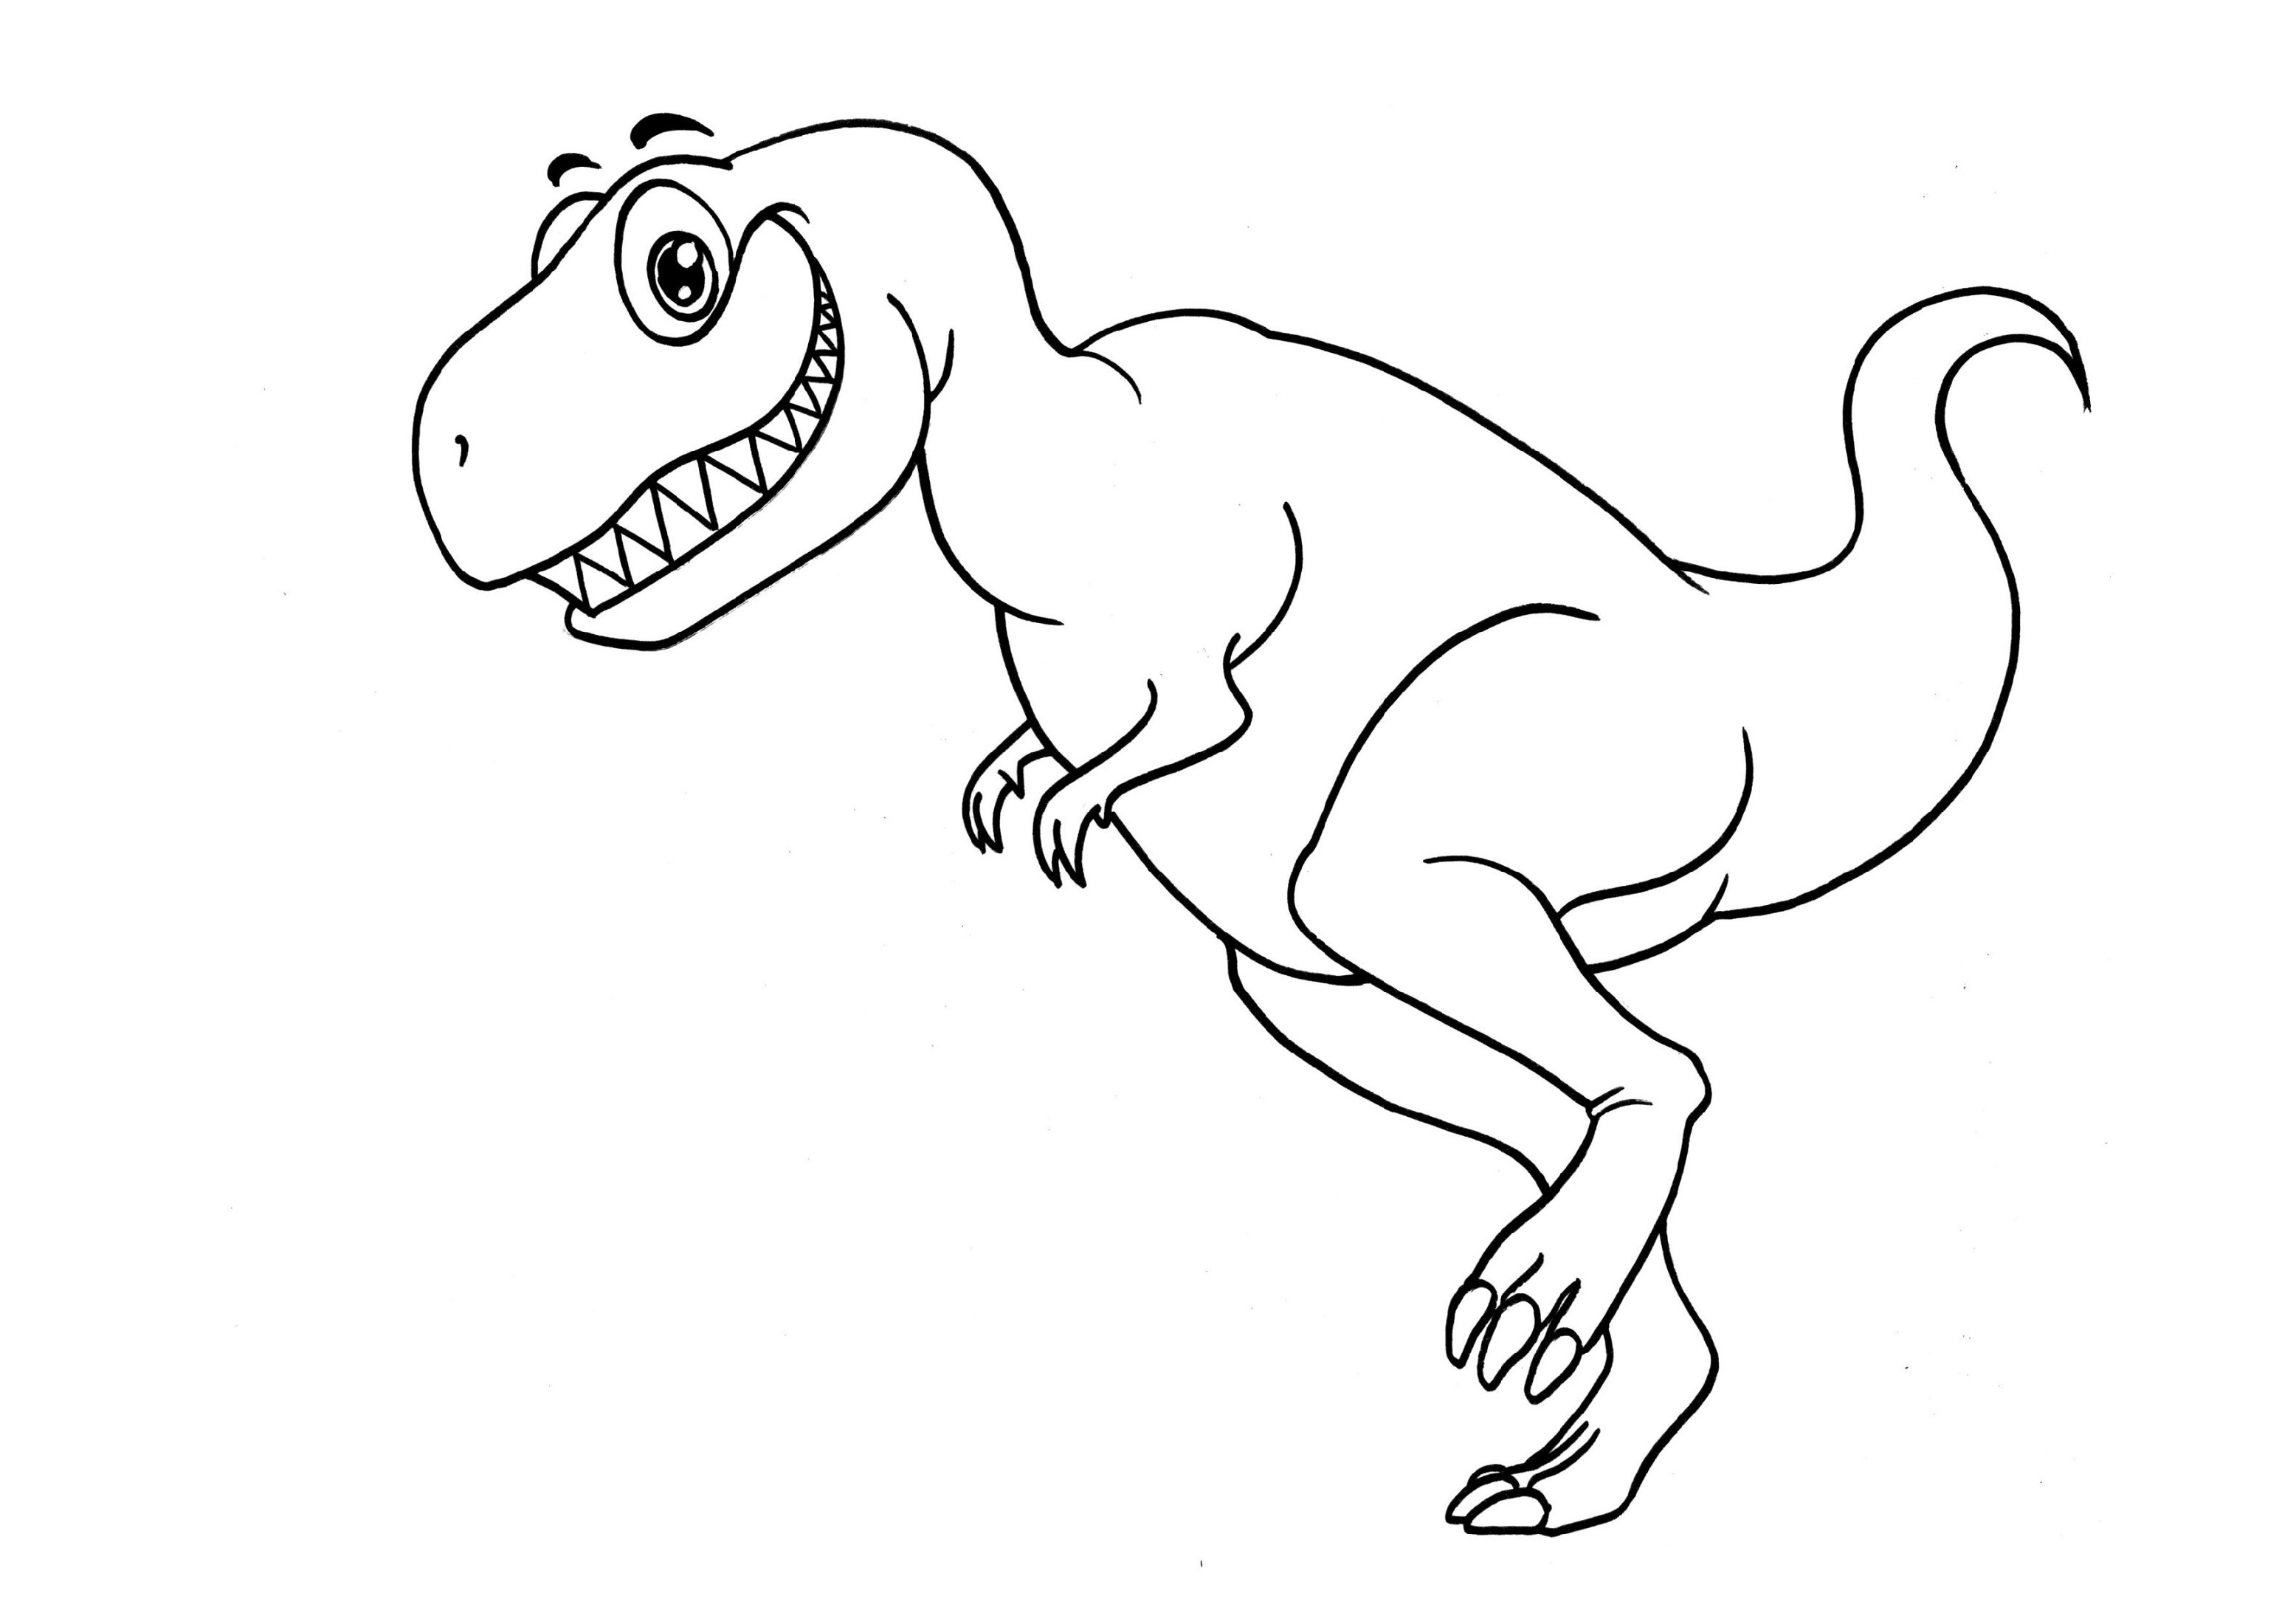 Tyrannosaurus Rex Coloring Page For Kids